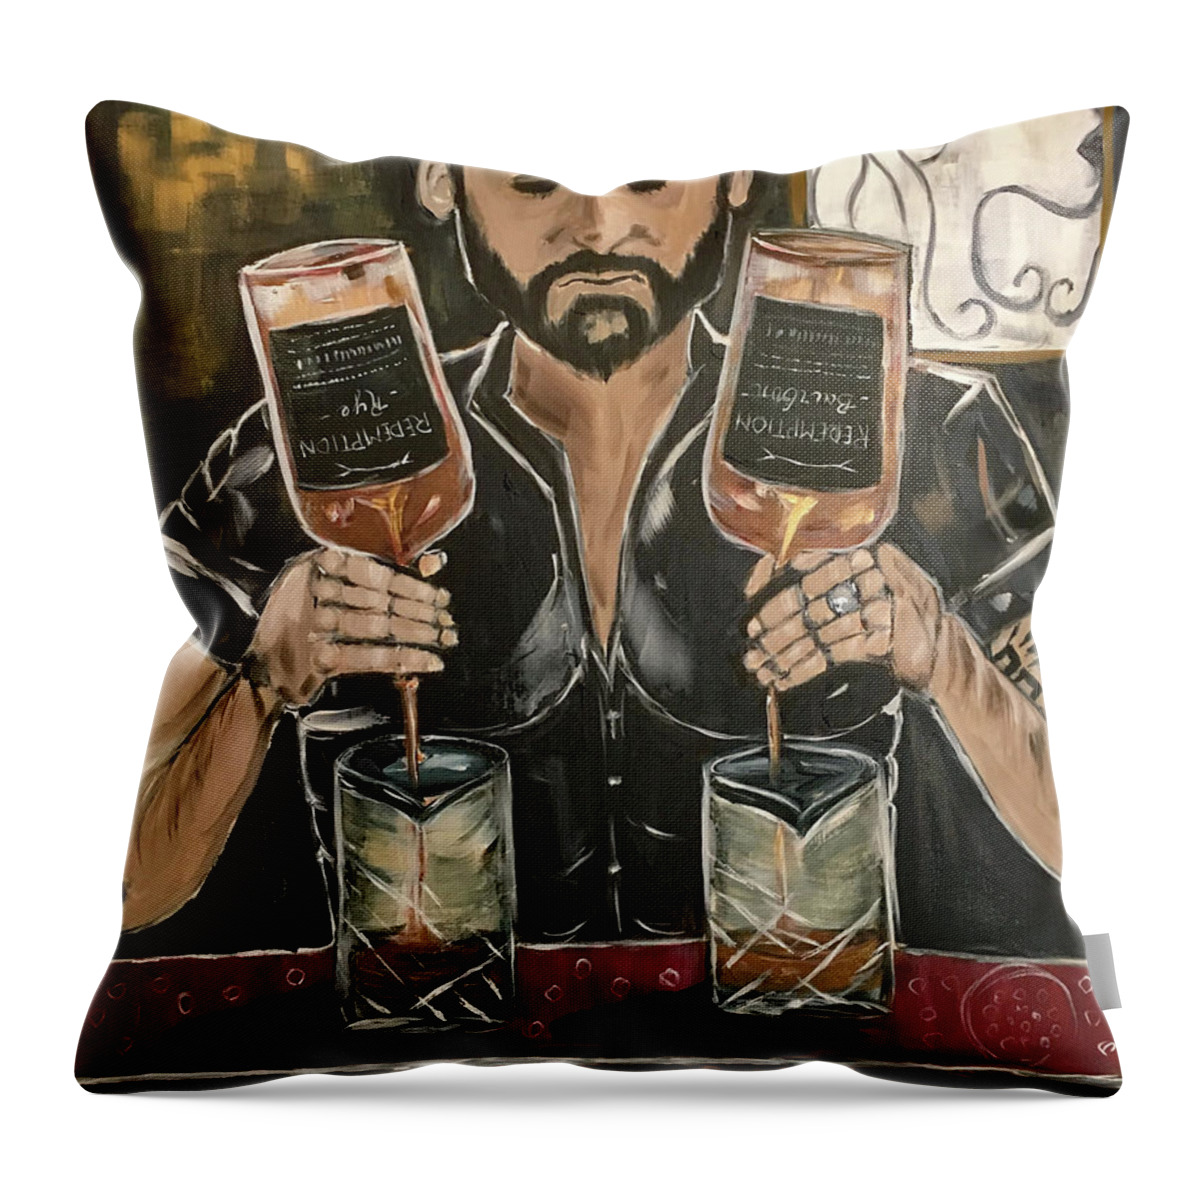 Bartender Throw Pillow featuring the painting He's Crafty featuring Mark by Roxy Rich